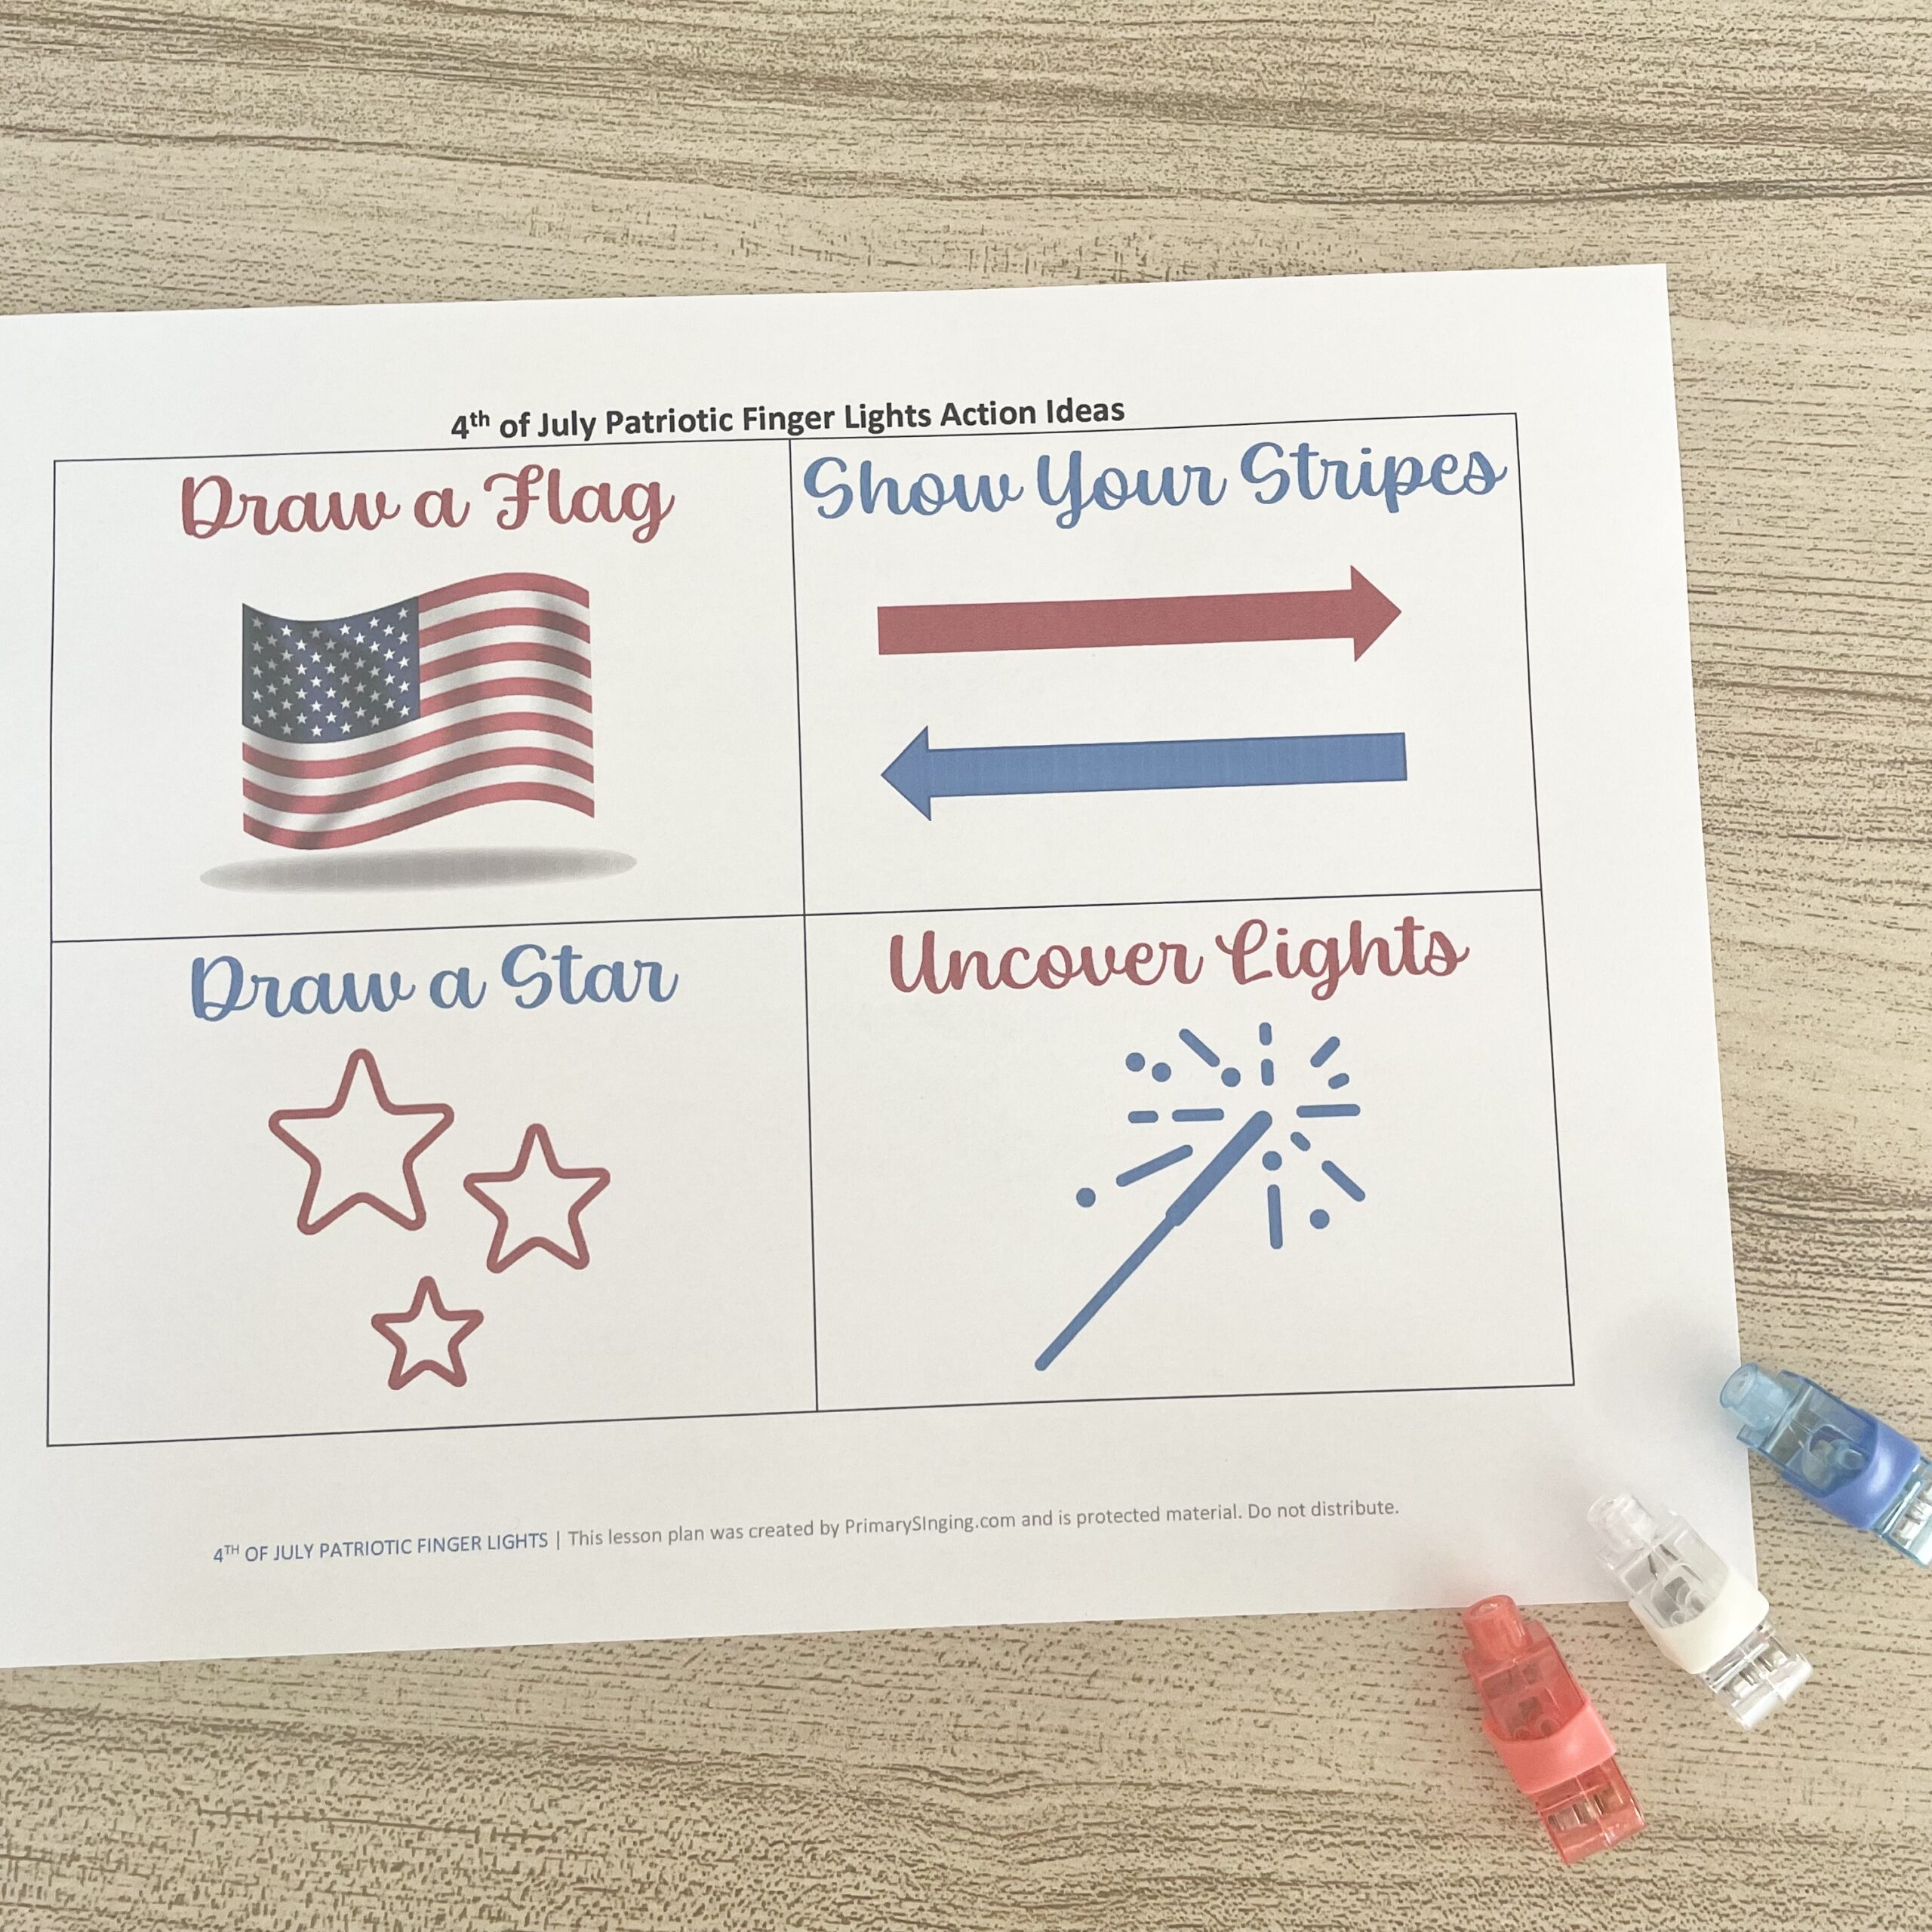 4th of July Patriotic Finger Lights - Use these fun and festive finger lights actions for 4th of July with printable action cards for LDS Primary Music Leaders.